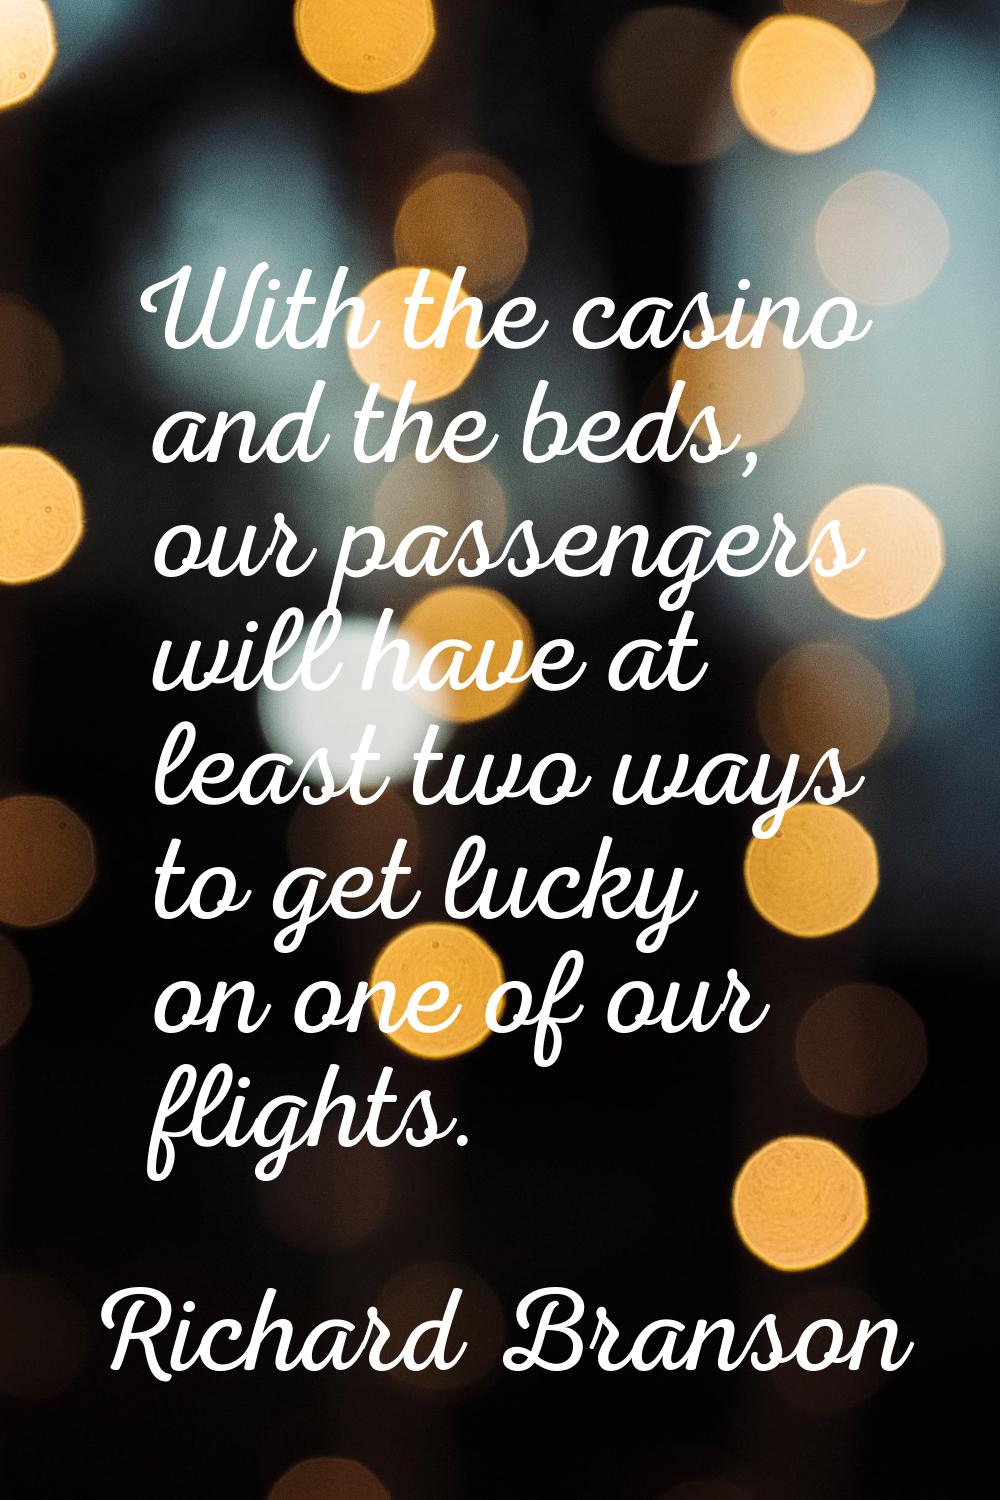 With the casino and the beds, our passengers will have at least two ways to get lucky on one of our